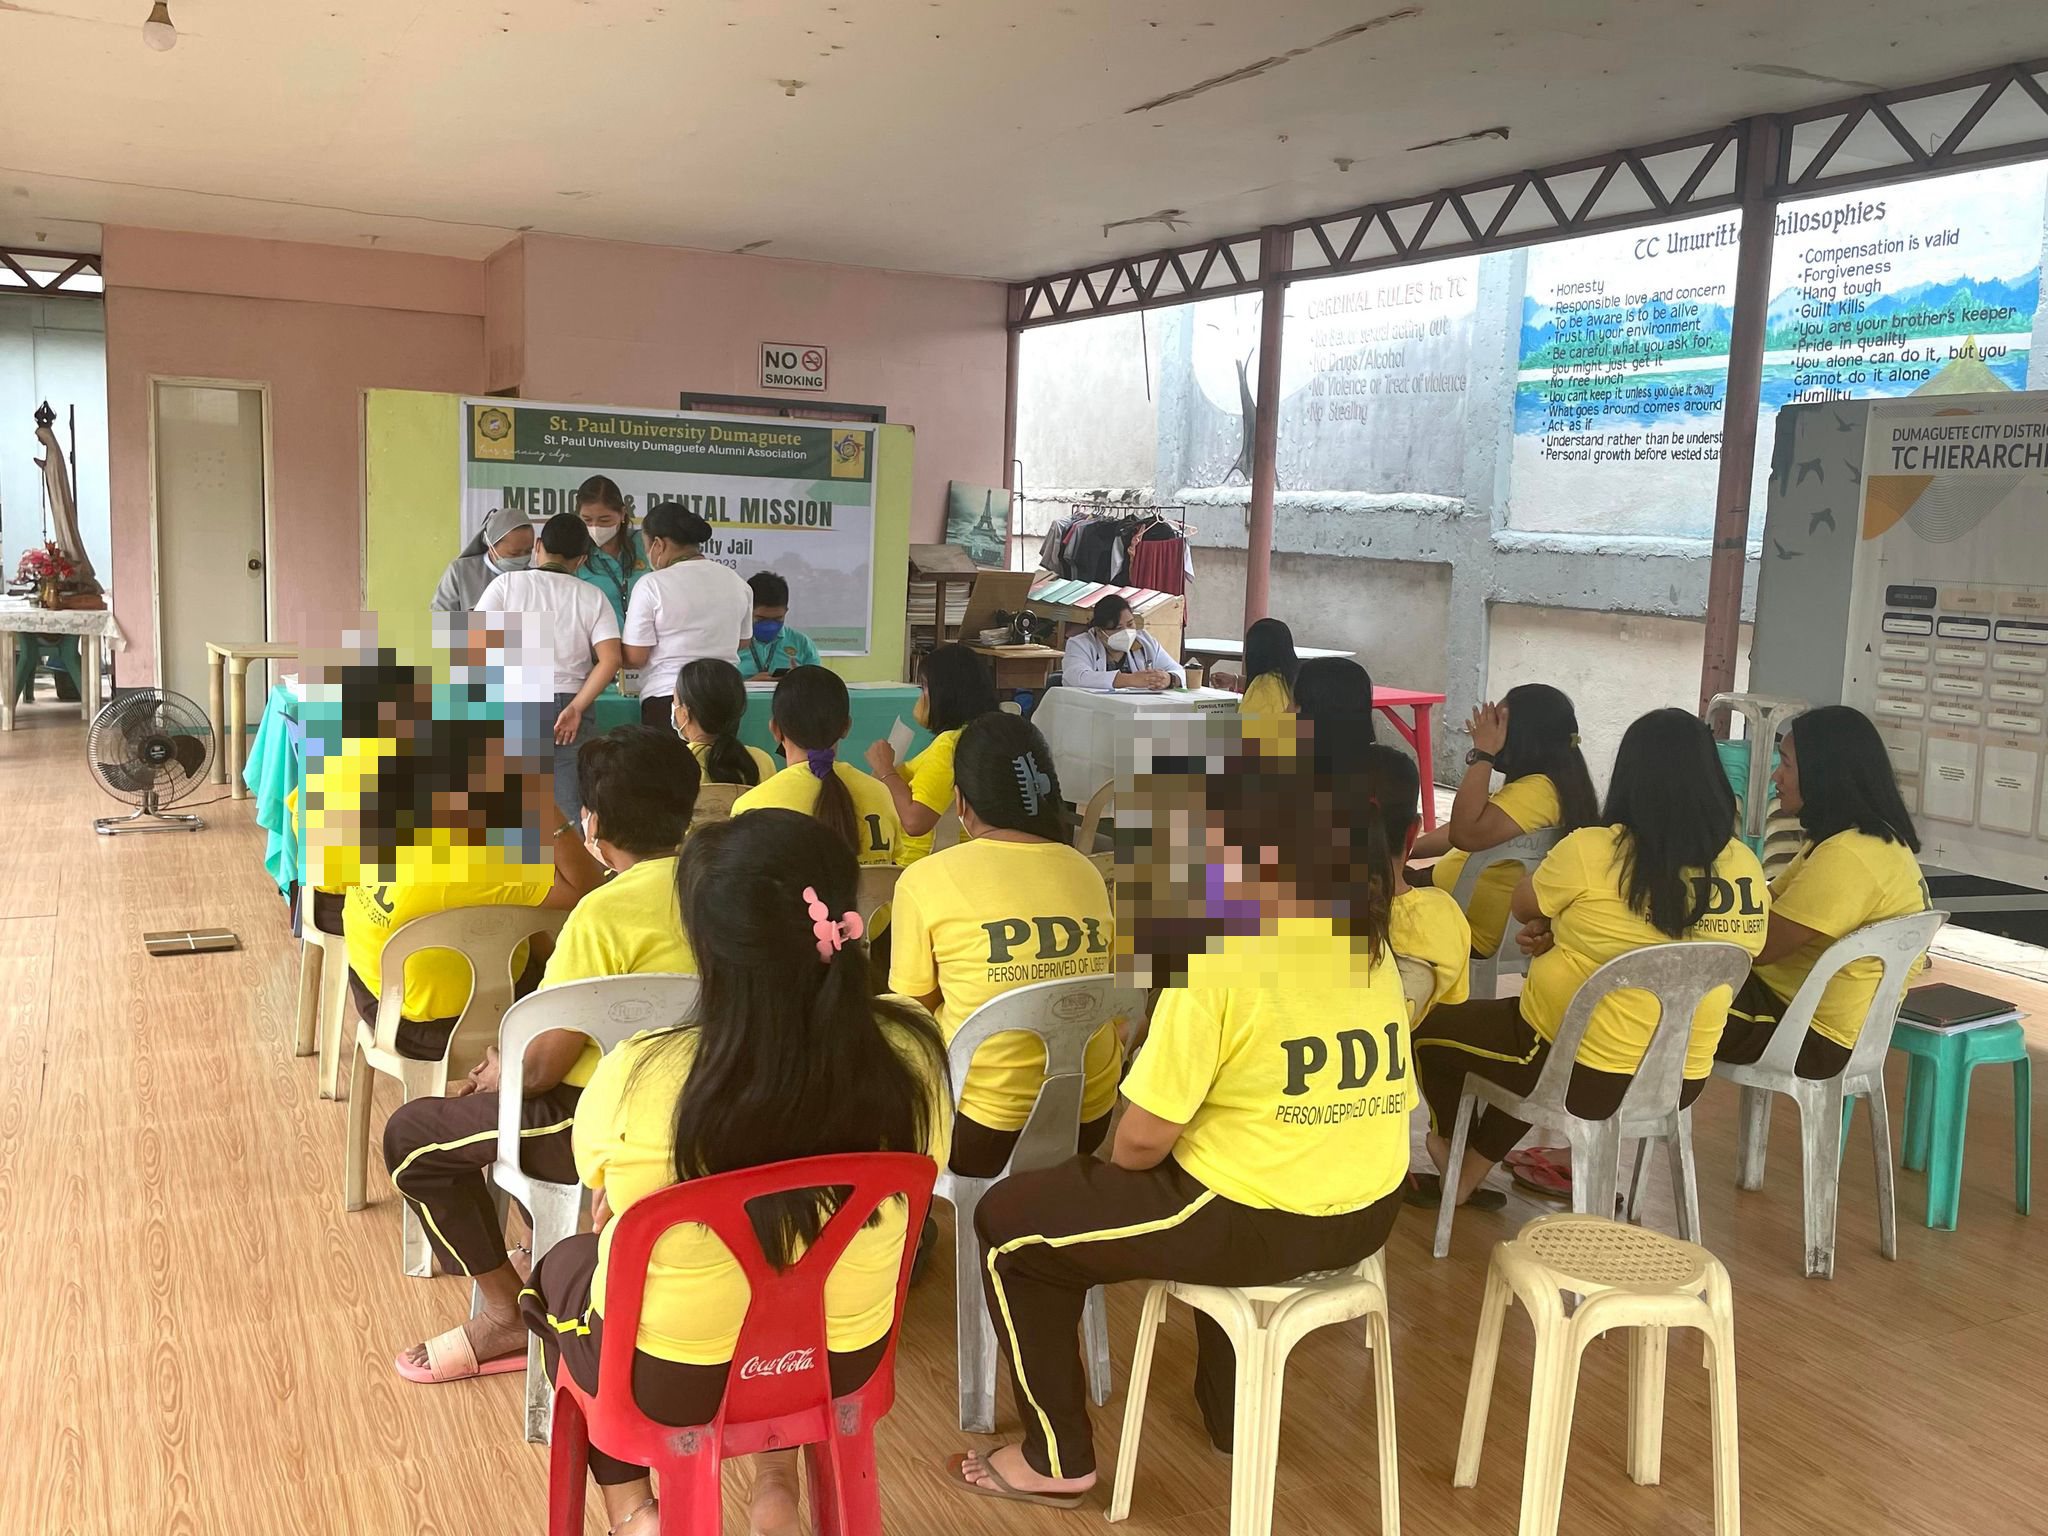 The SPUD Alumni Association together with SPUD conducted a medical mission at the City and Provincial Jails on February 28 and March 06, 2023 respectively. 